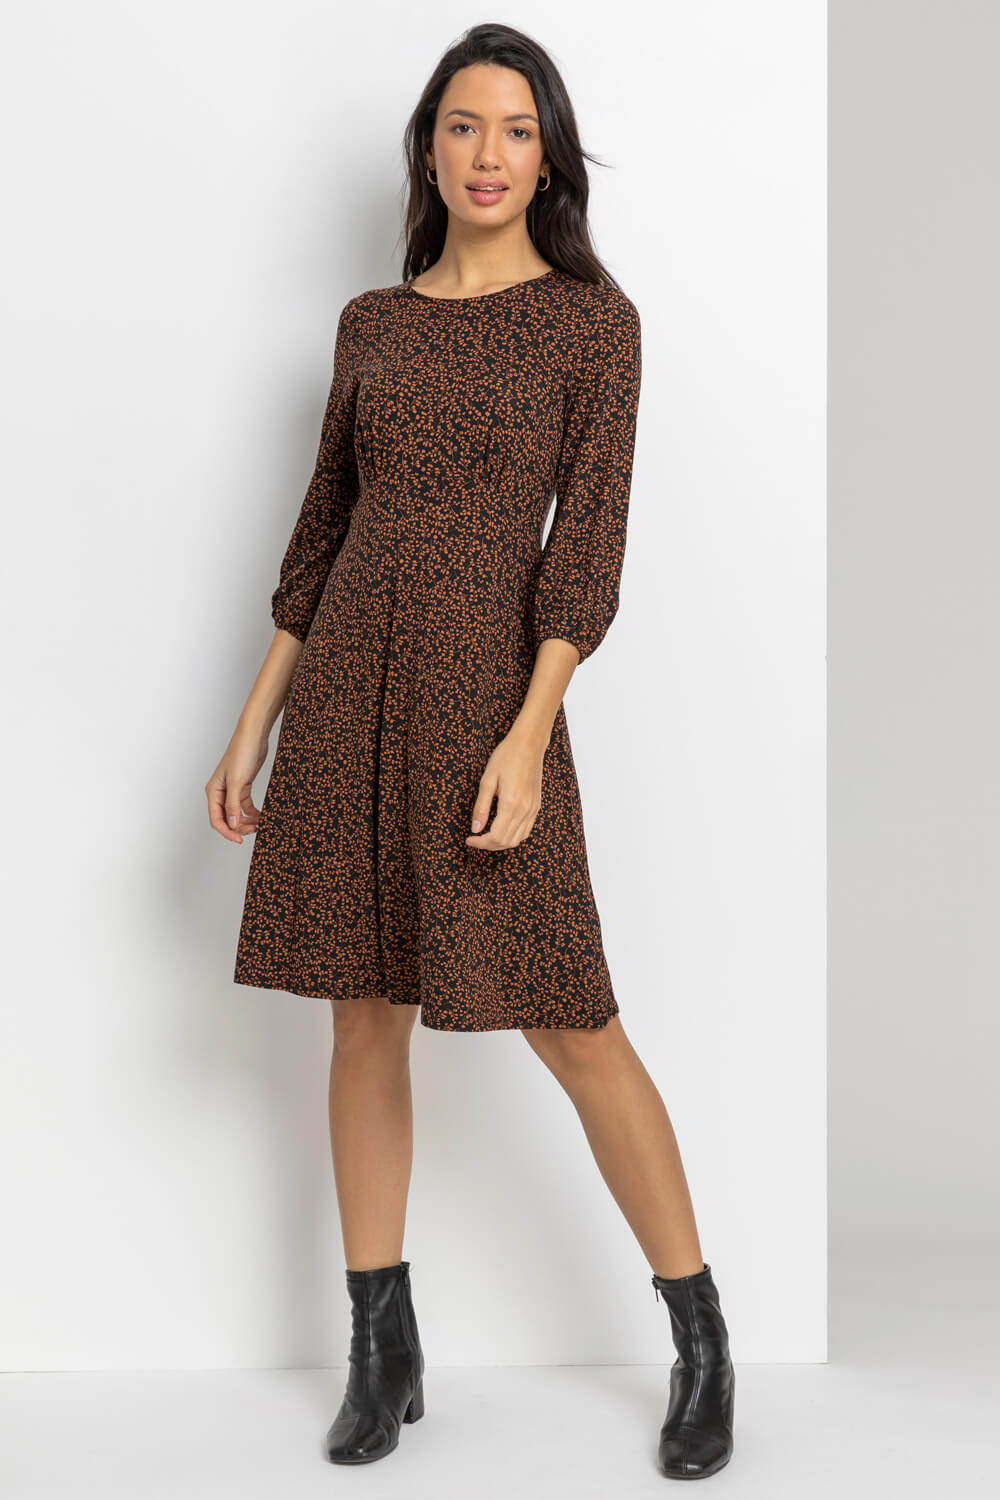 Brown Ditsy Floral Print Dress, Image 3 of 4